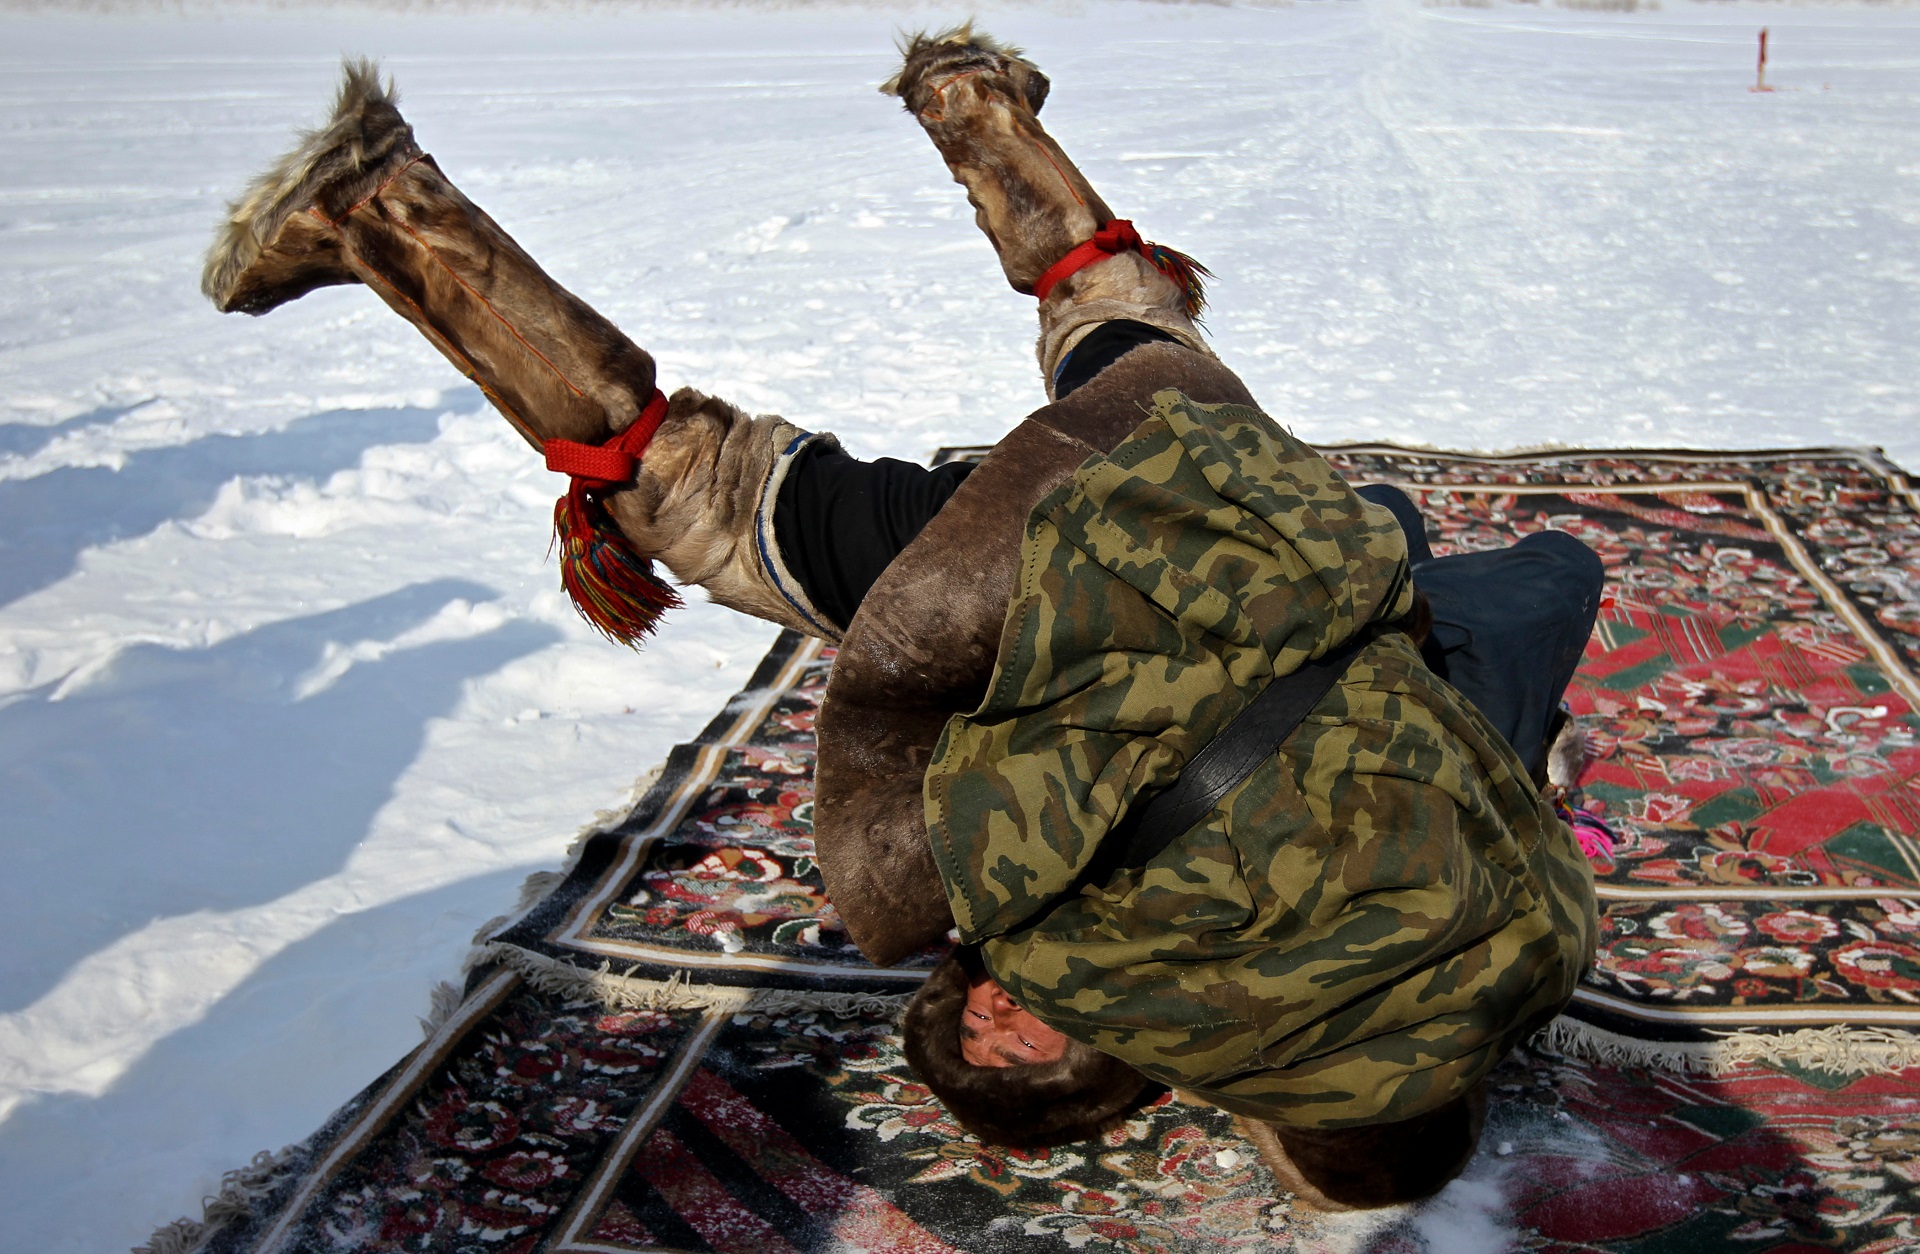 Competition in traditional Nenets wrestling at the "Day of the reindeer herdsman" festival in Schuchye village, Yamal-Nenets Autonomous District.